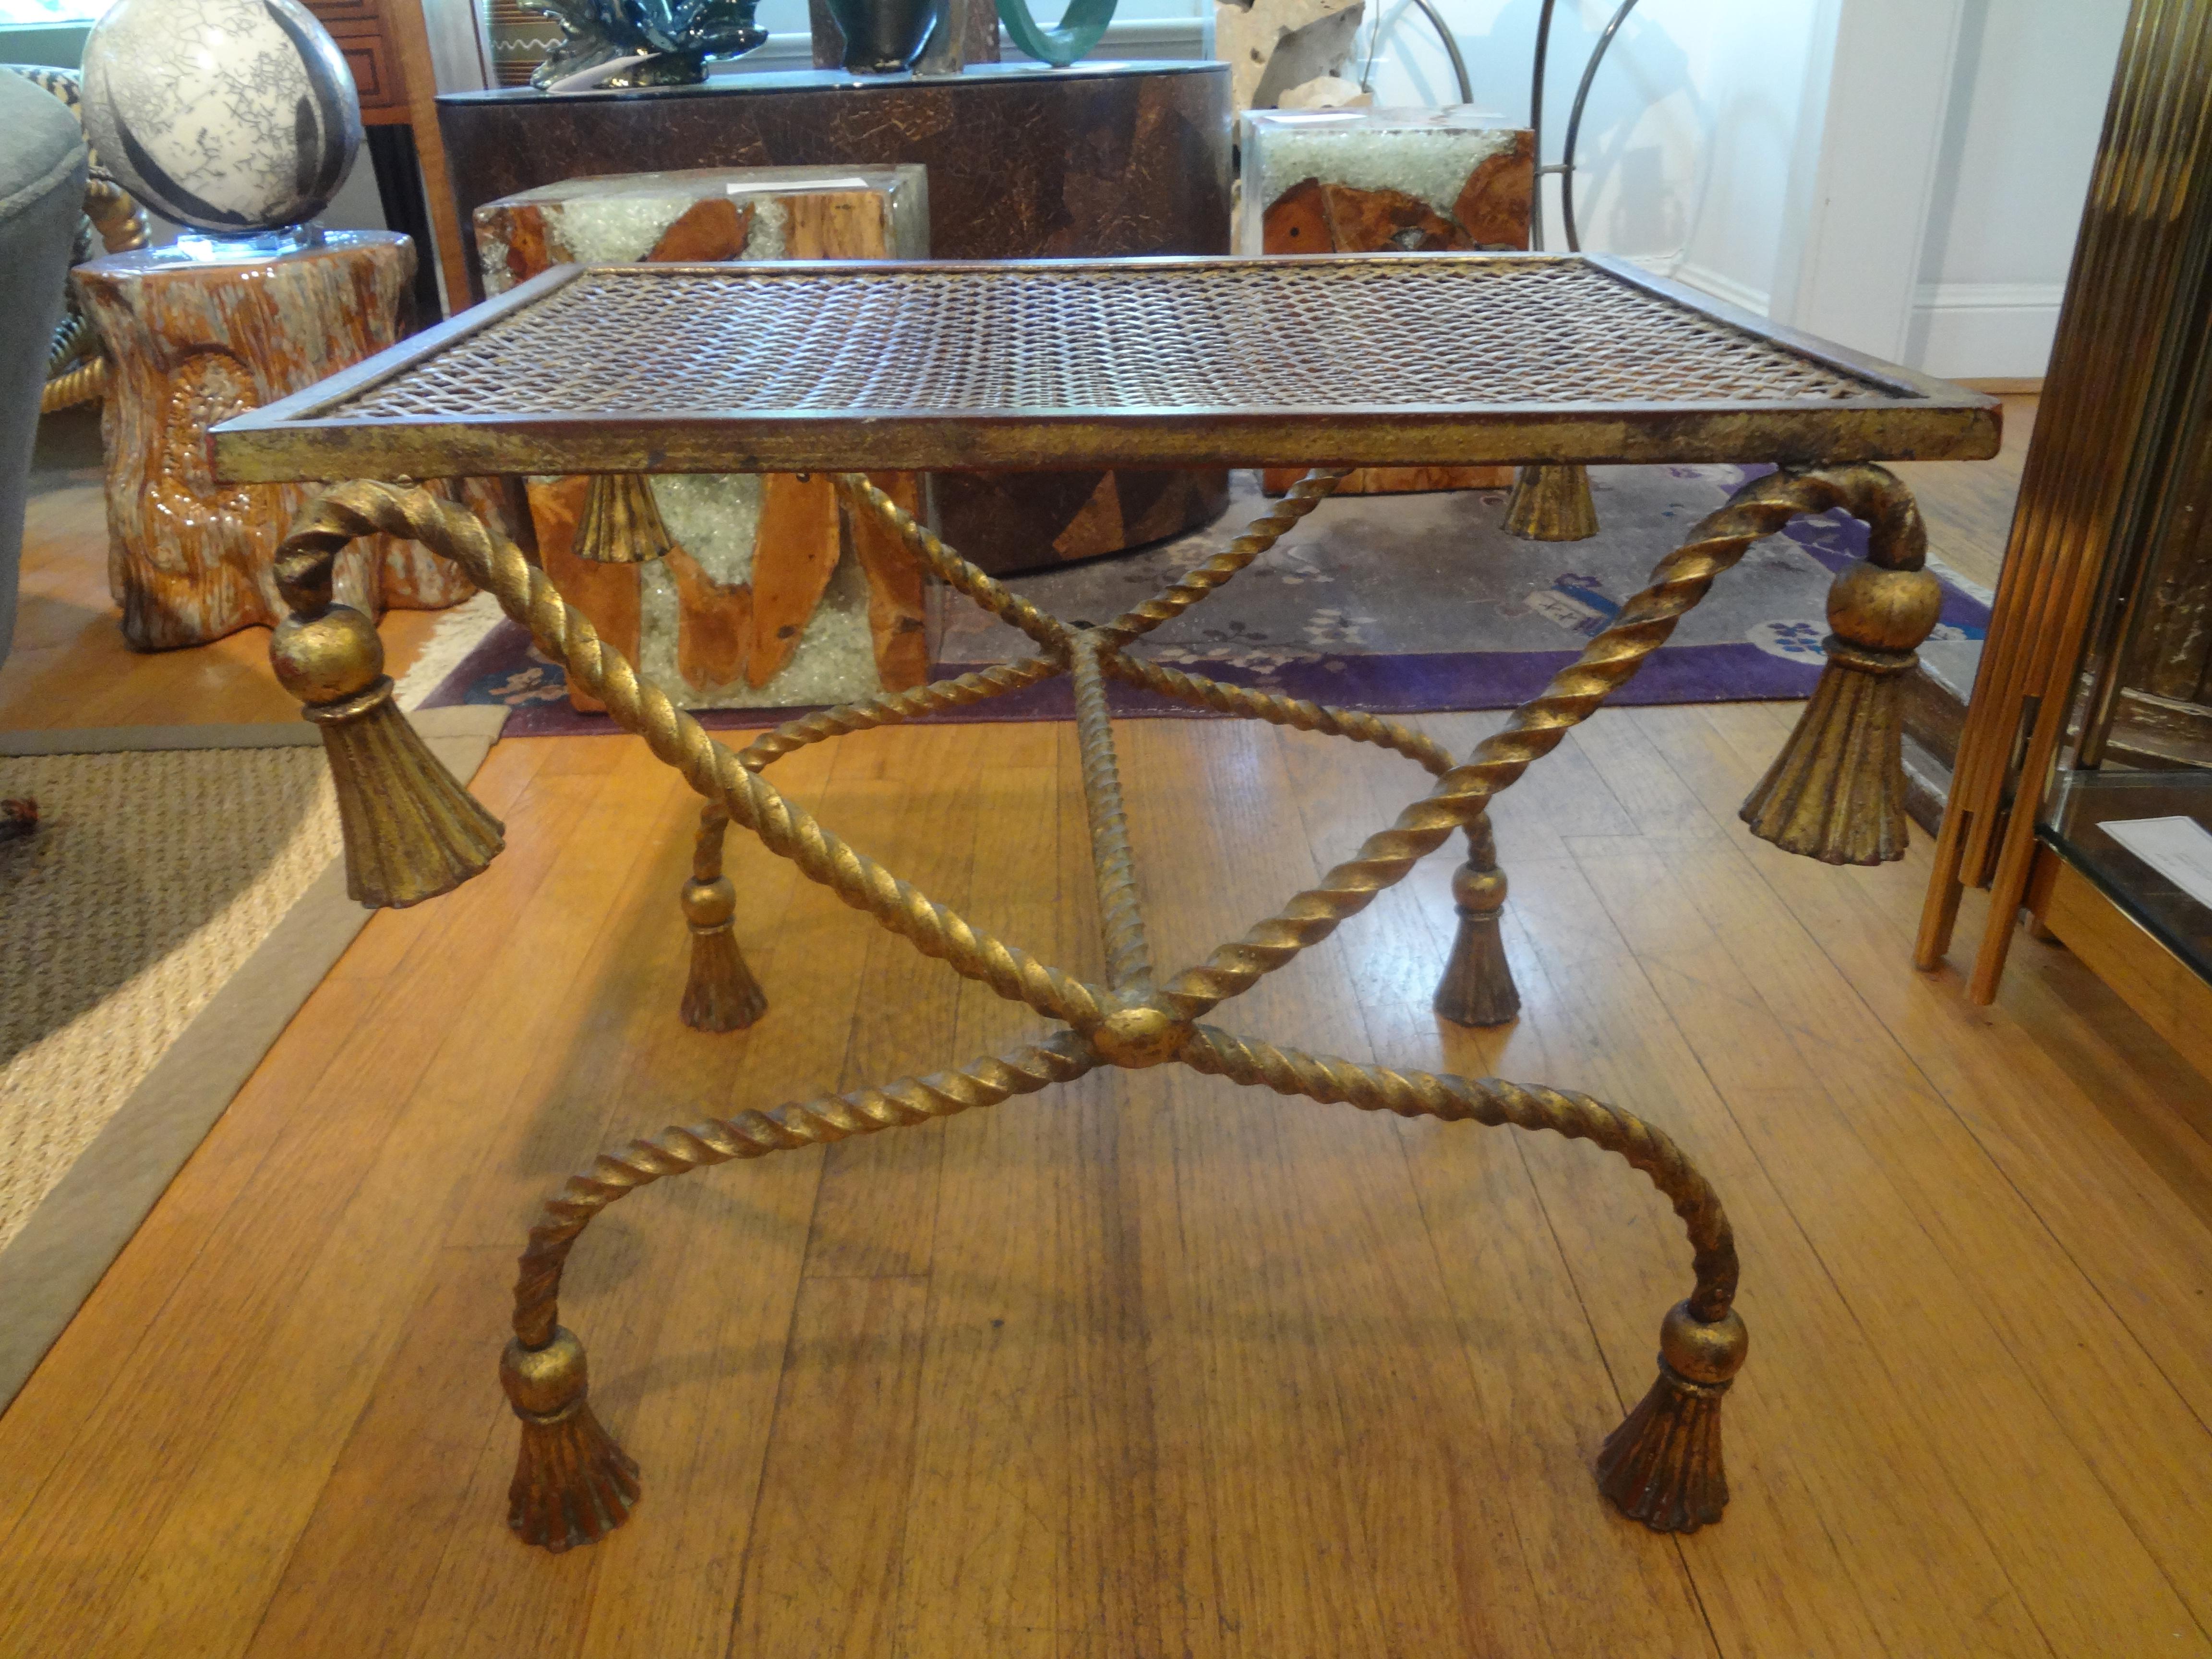 Italian gilt iron rope and tassel table or bench.
Stunning and versatile Italian gilt iron rope and tassel table, bench, stool or ottoman. Good weight and beautifully made.